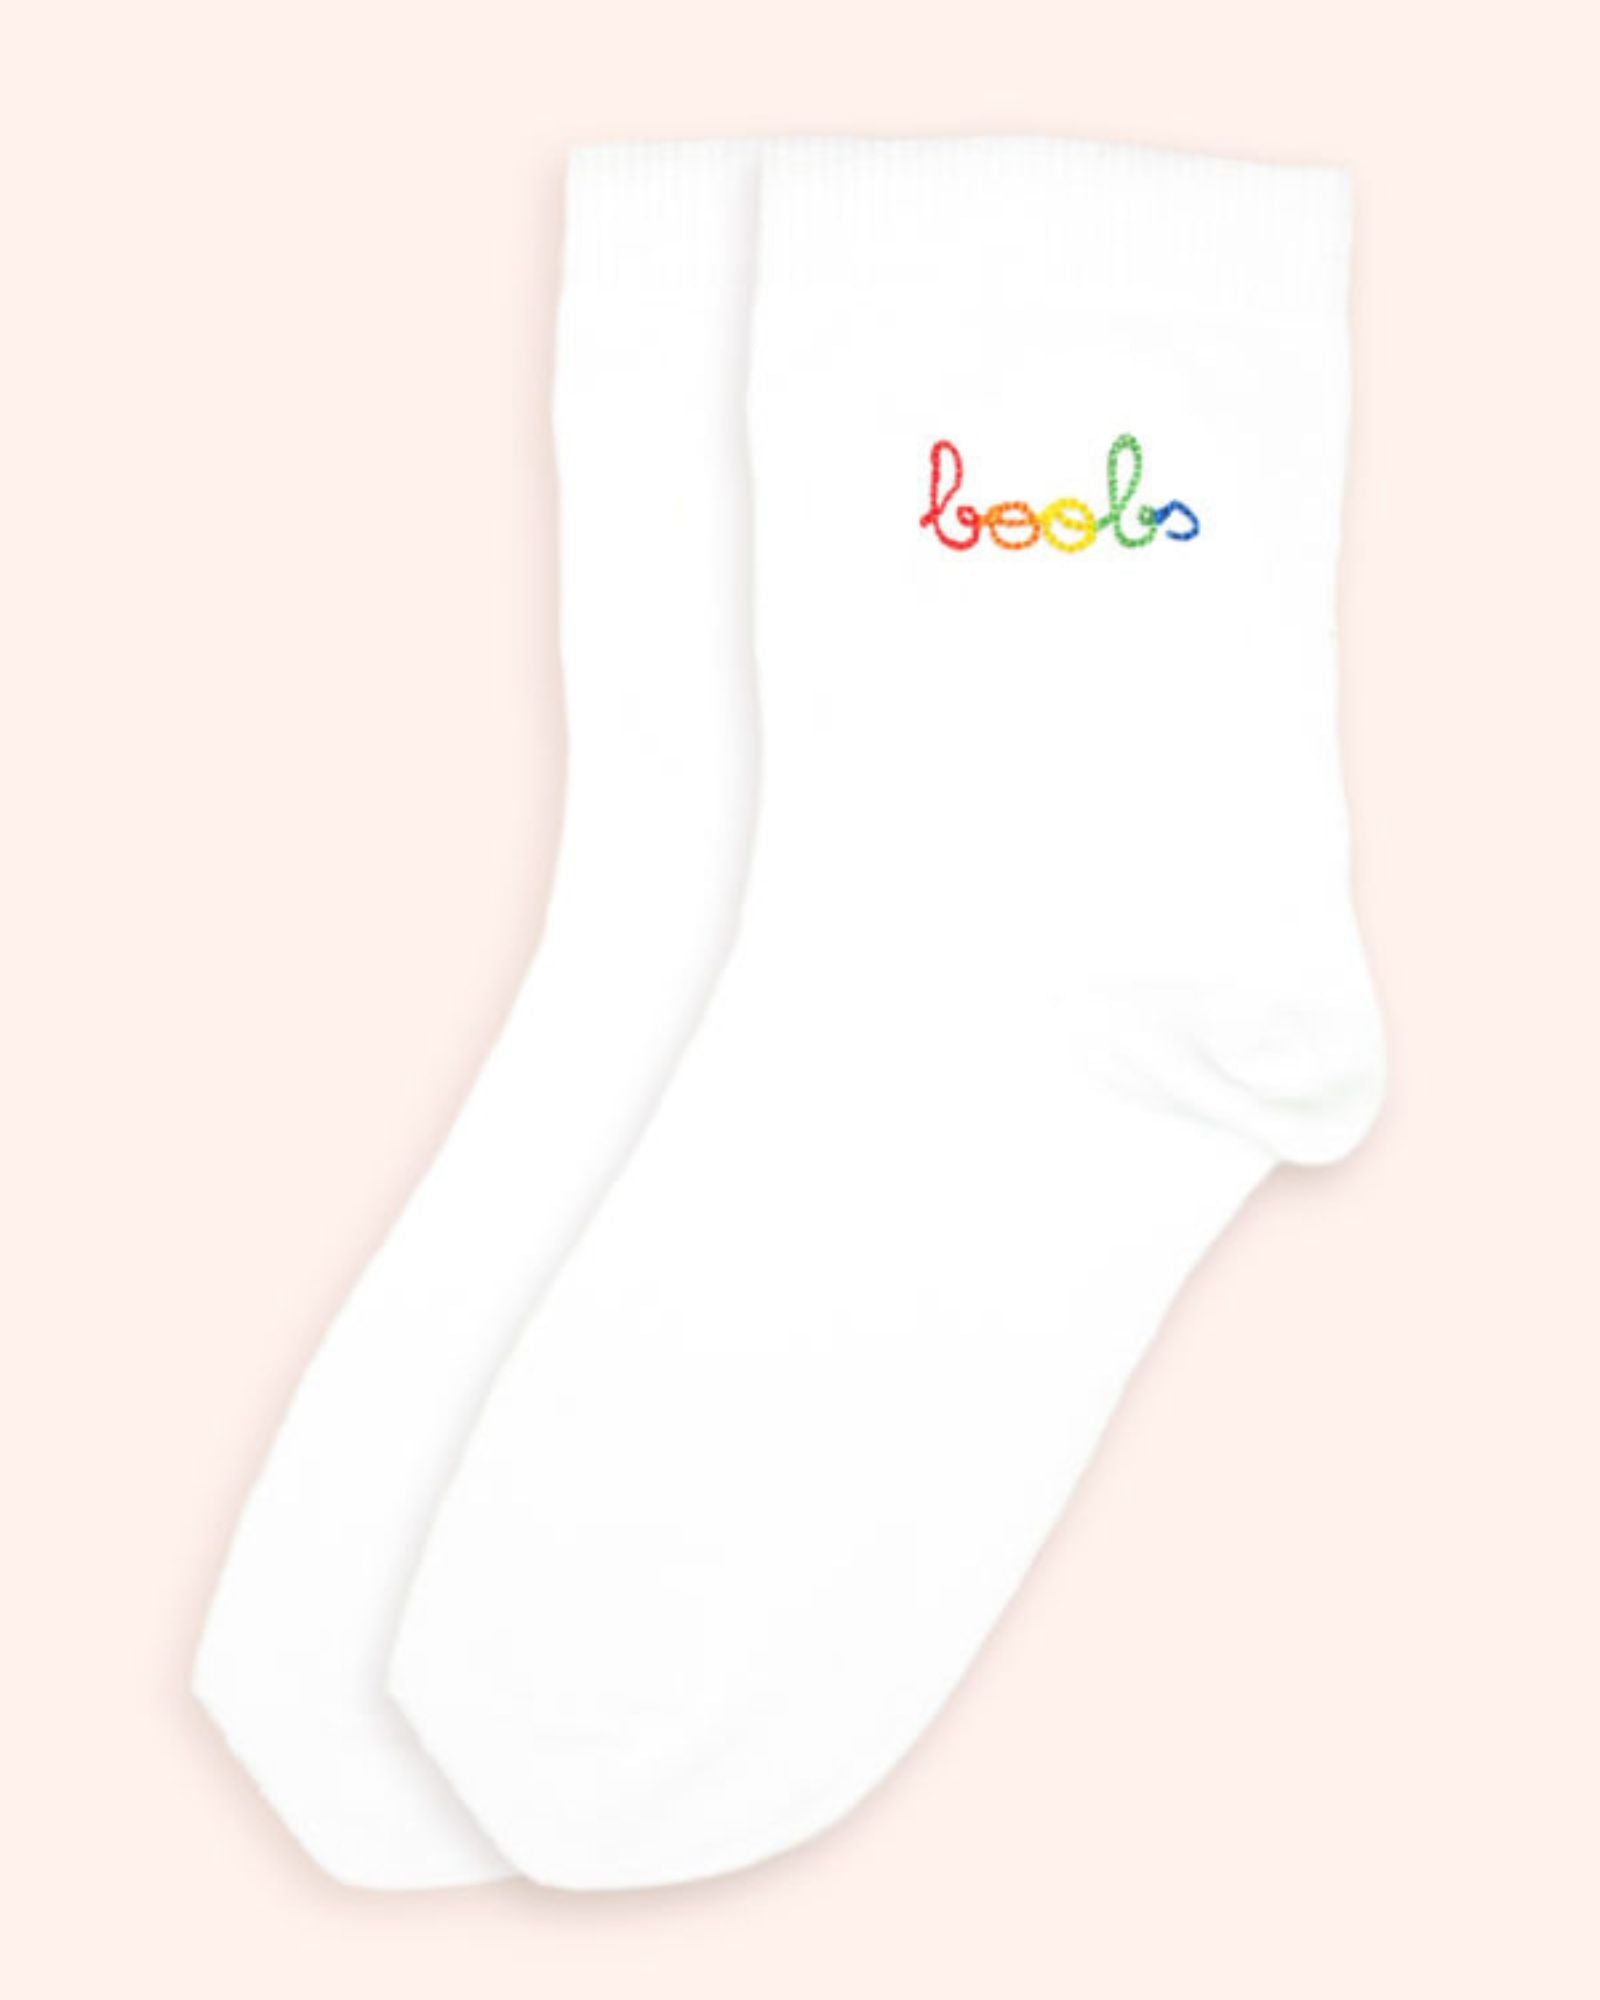 Celebrate Diversity with 'Boobs' Rainbow-Embroidered Socks by Vfelder